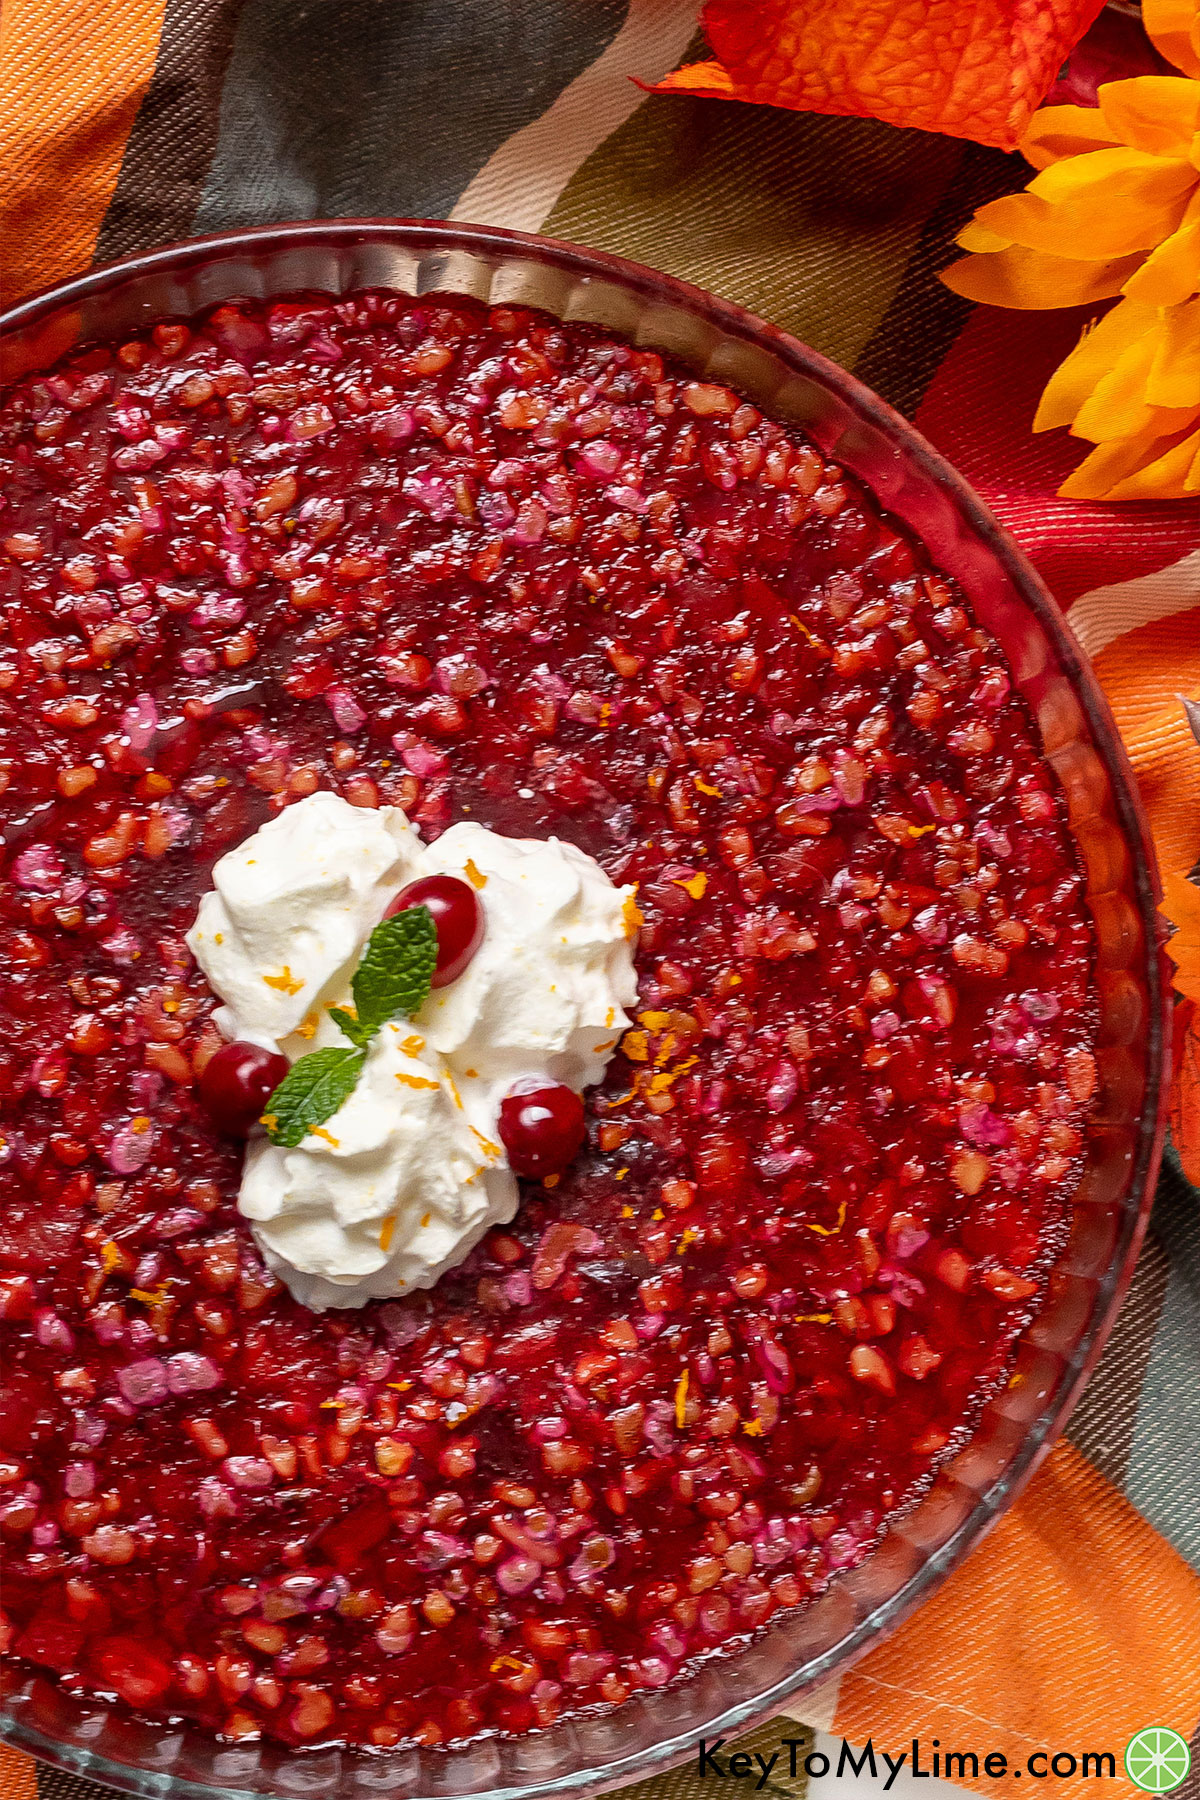 A garnished jello salad with whipped cream, whole cranberries, and orange zest on top.